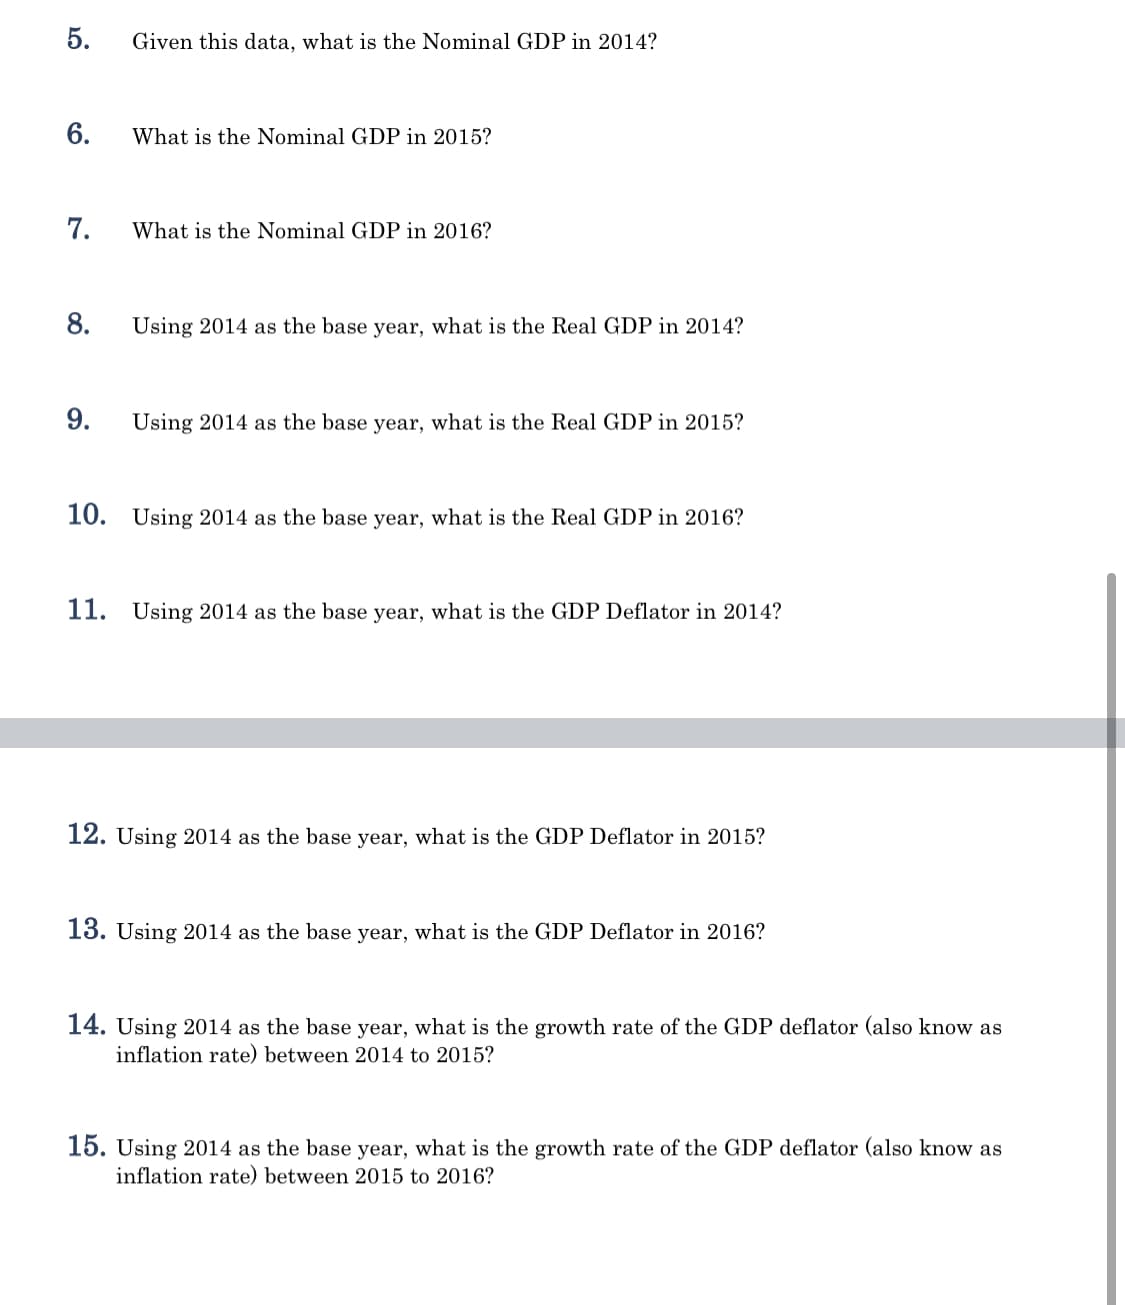 5.
Given this data, what is the Nominal GDP in 2014?
6.
What is the Nominal GDP in 2015?
7.
What is the Nominal GDP in 2016?
8.
Using 2014 as the base year, what is the Real GDP in 2014?
9.
Using 2014 as the base year, what is the Real GDP in 2015?
10. Using 2014 as the base year, what is the Real GDP in 2016?
11. Using 2014 as the base year, what is the GDP Deflator in 2014?
12. Using 2014 as the base year, what is the GDP Deflator in 2015?
13. Using 2014 as the base year, what is the GDP Deflator in 2016?
14. Using 2014 as the base year, what is the growth rate of the GDP deflator (also know as
inflation rate) between 2014 to 2015?
15. Using 2014 as the base year, what is the growth rate of the GDP deflator (also know as
inflation rate) between 2015 to 2016?
